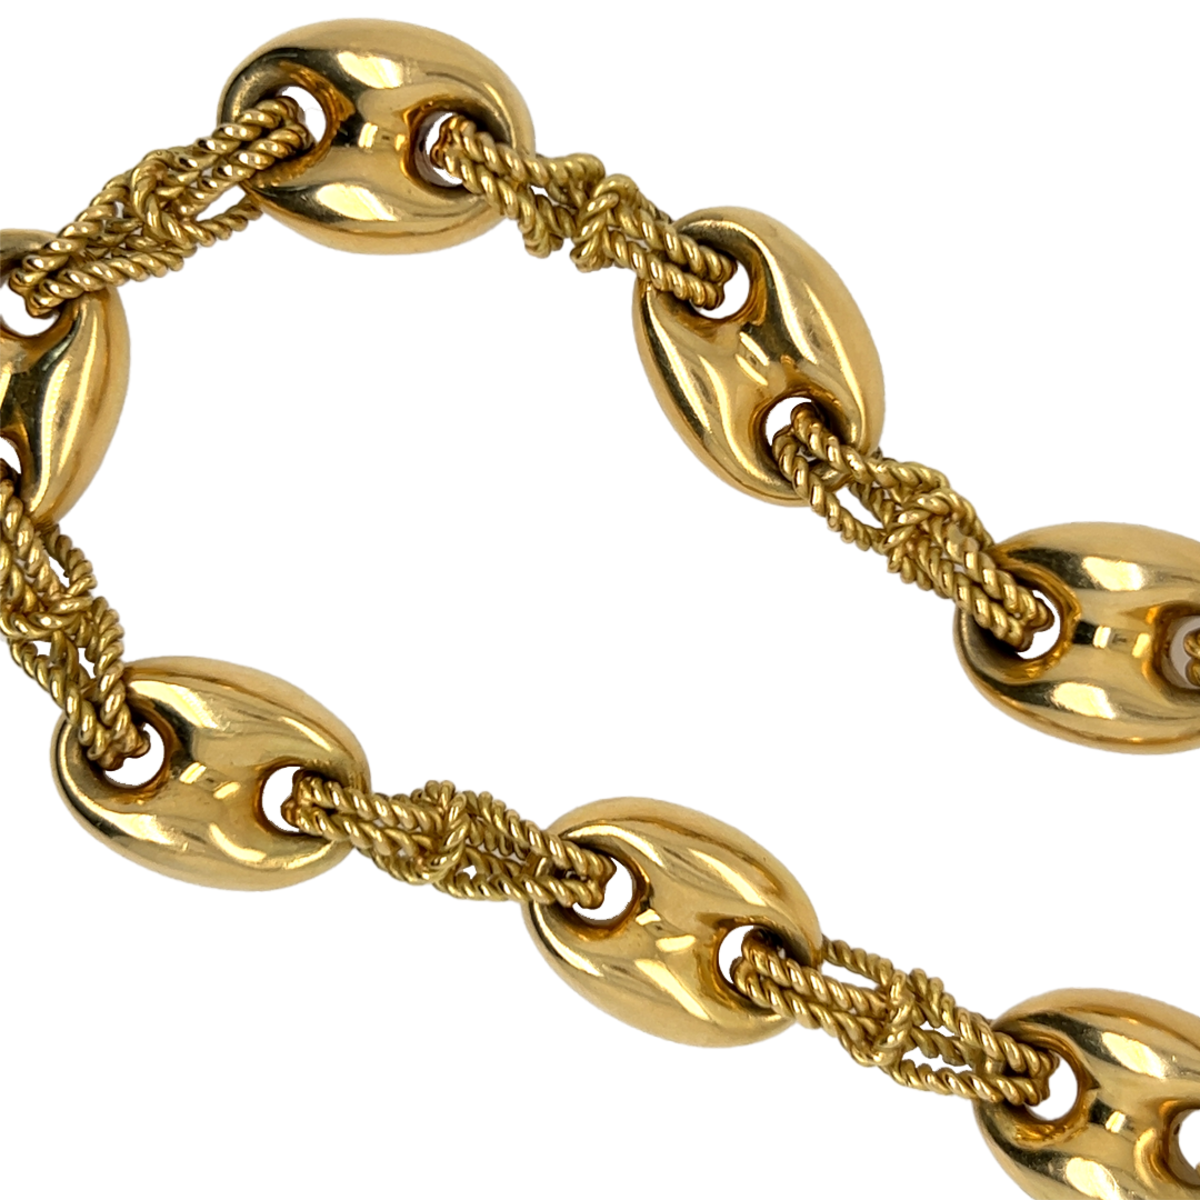 Post-1980s 18KT Yellow Gold Necklace close-up details